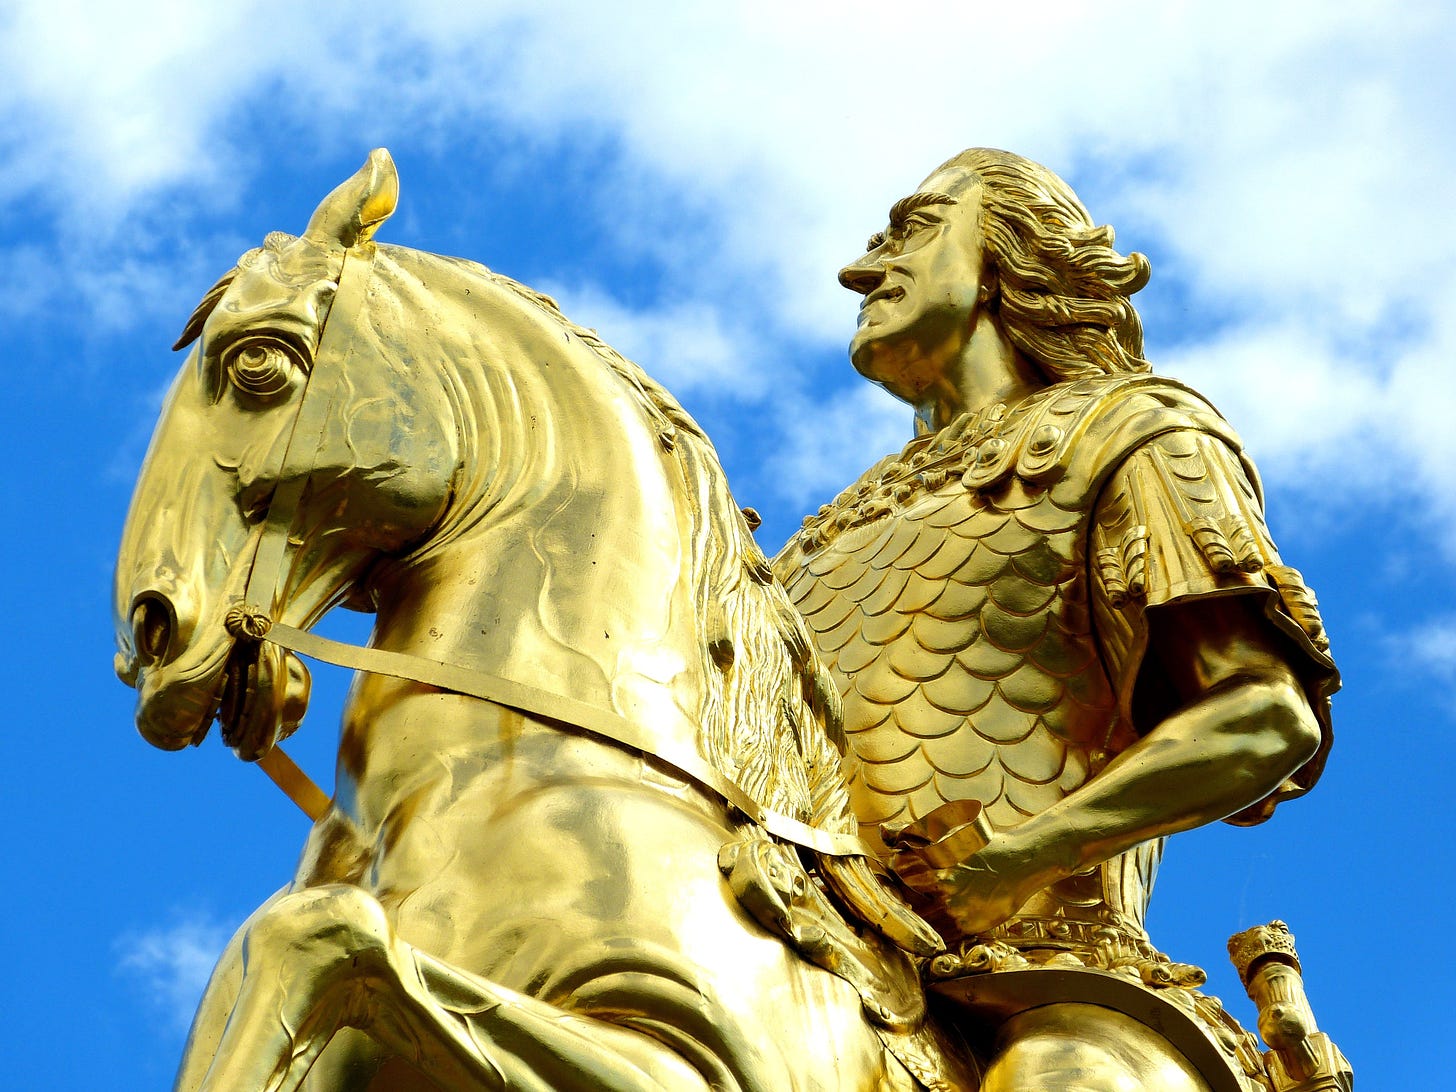 A golden statue of a king sitting on a horse.